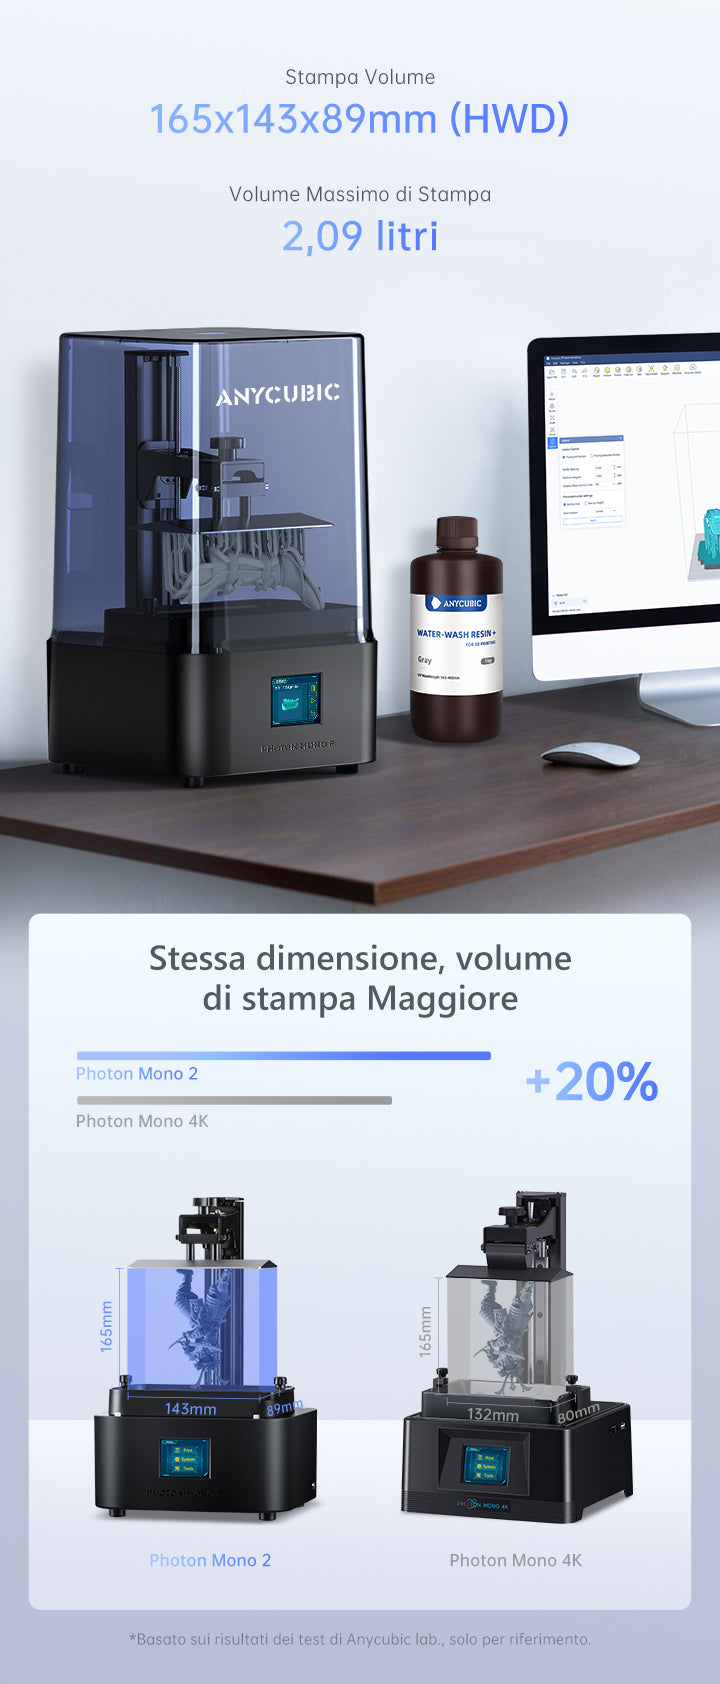 Anycubic Photon Mono 2 - Larger Print Volume Empowers Your Creativity